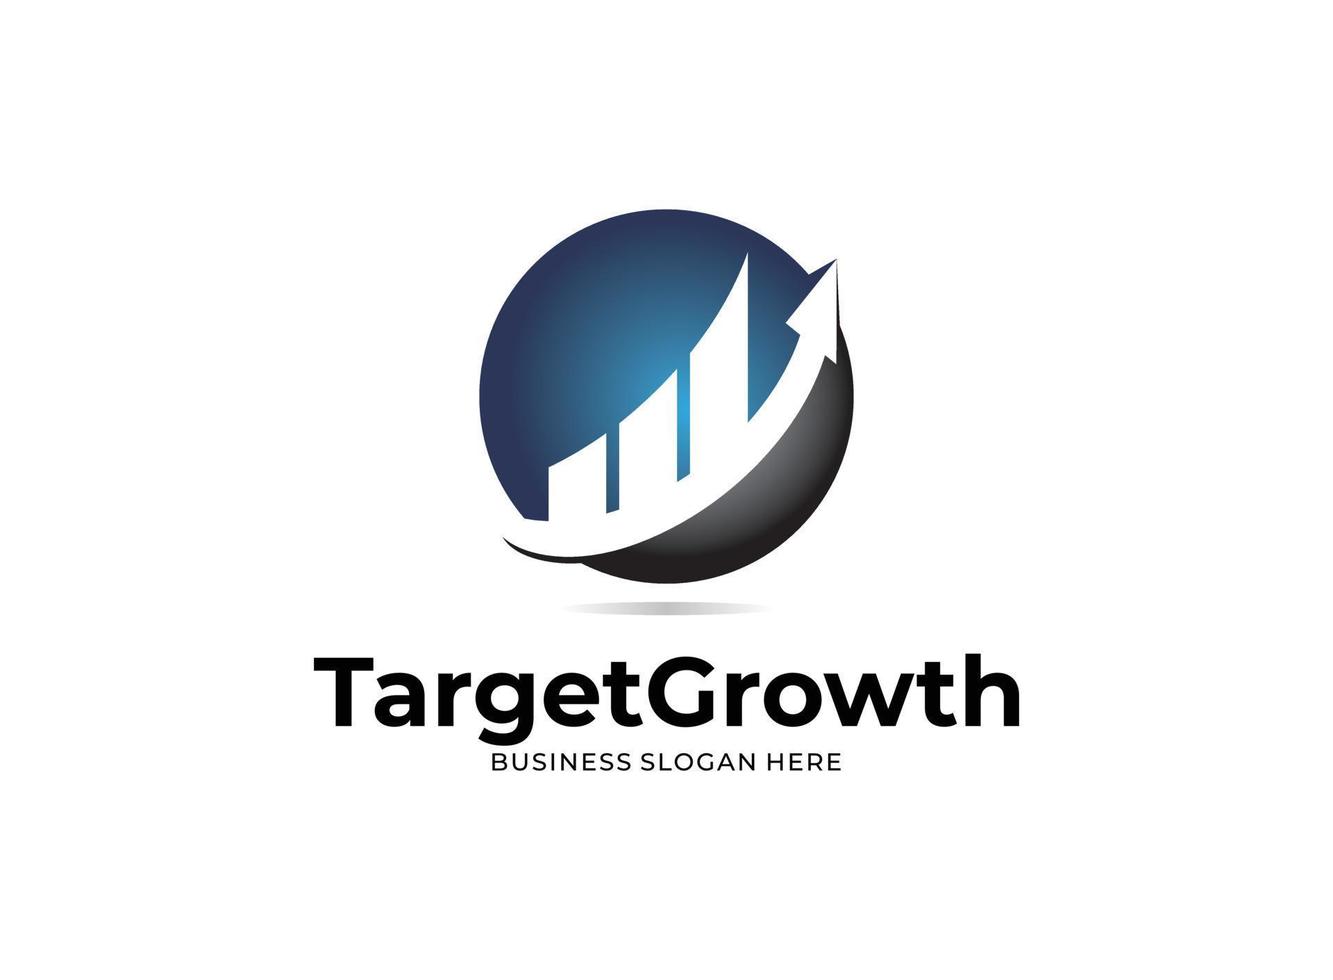 Illustration vector graphic of financial target growth logo designs concept. Perfect for financial, accounting, marketing, business, advisor, stock, market, investment, trading, and corporate.